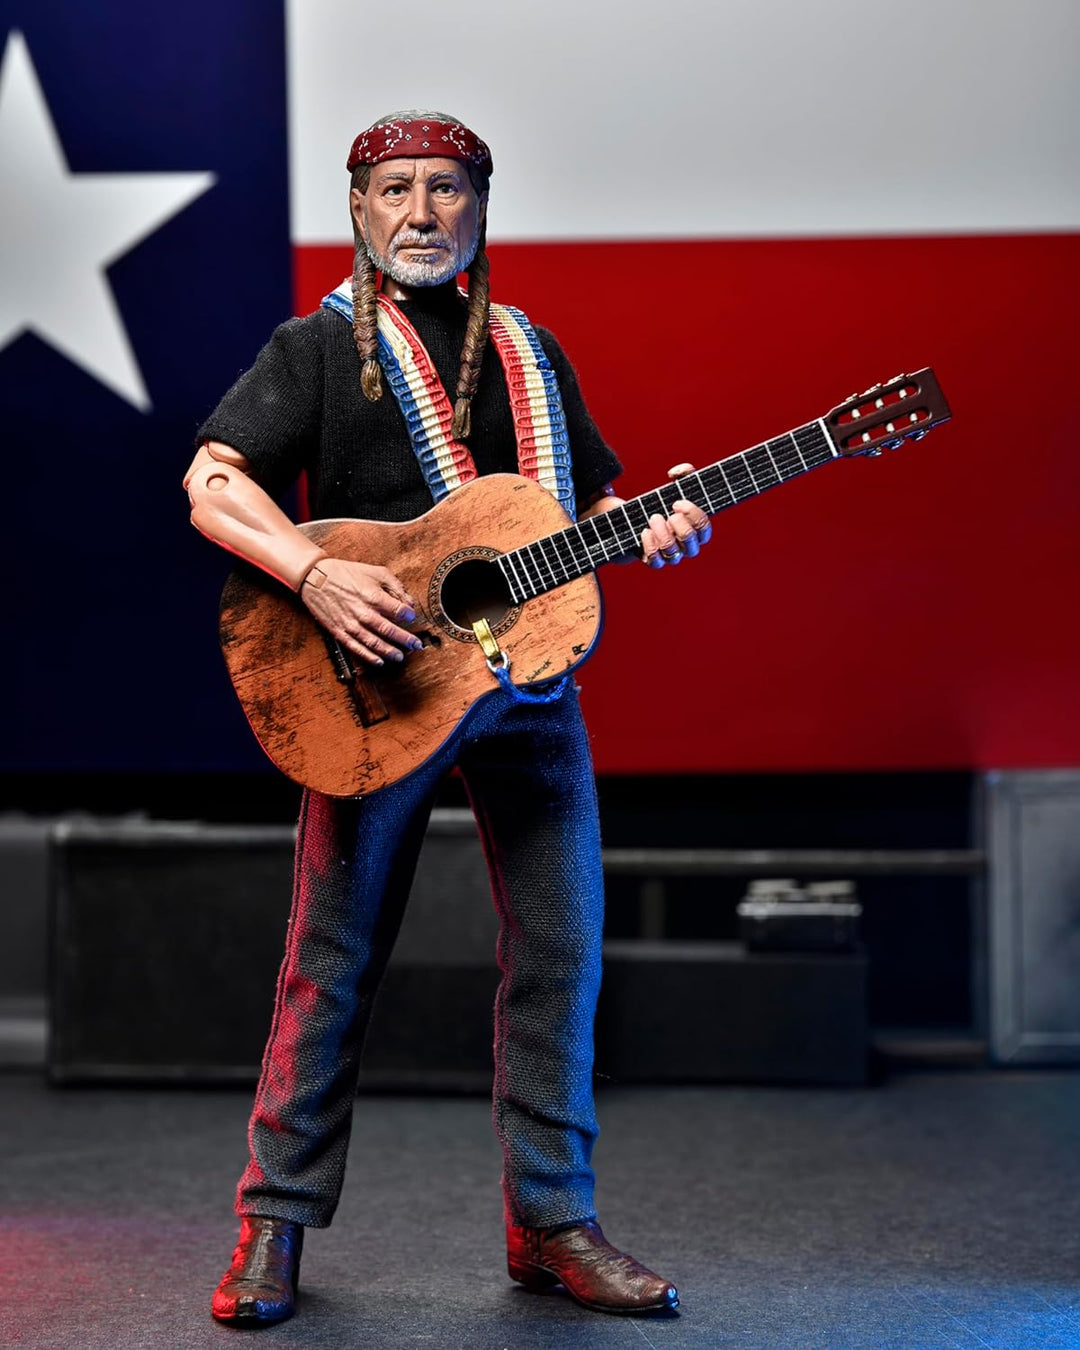 NECA Willie Nelson 8" Clothed Action Figure